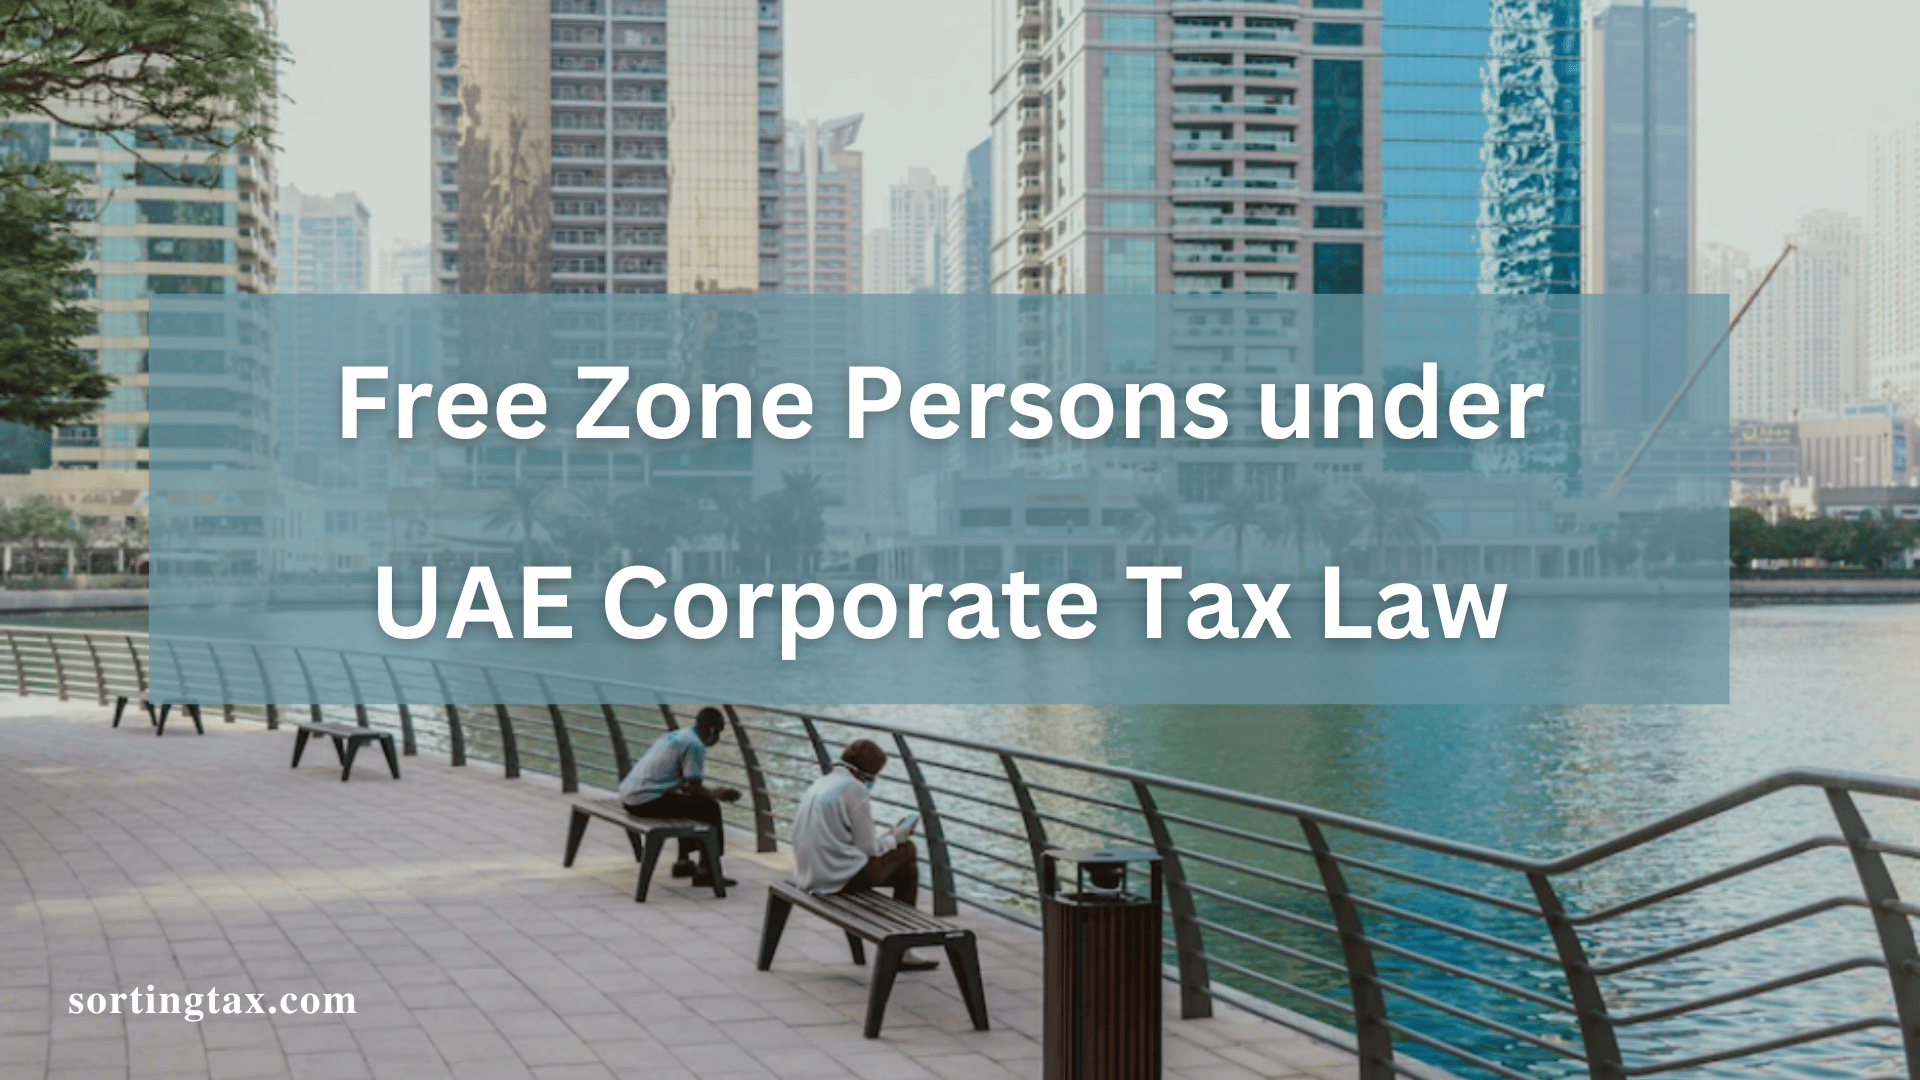 Free Zone Persons under the UAE Corporate Tax Law